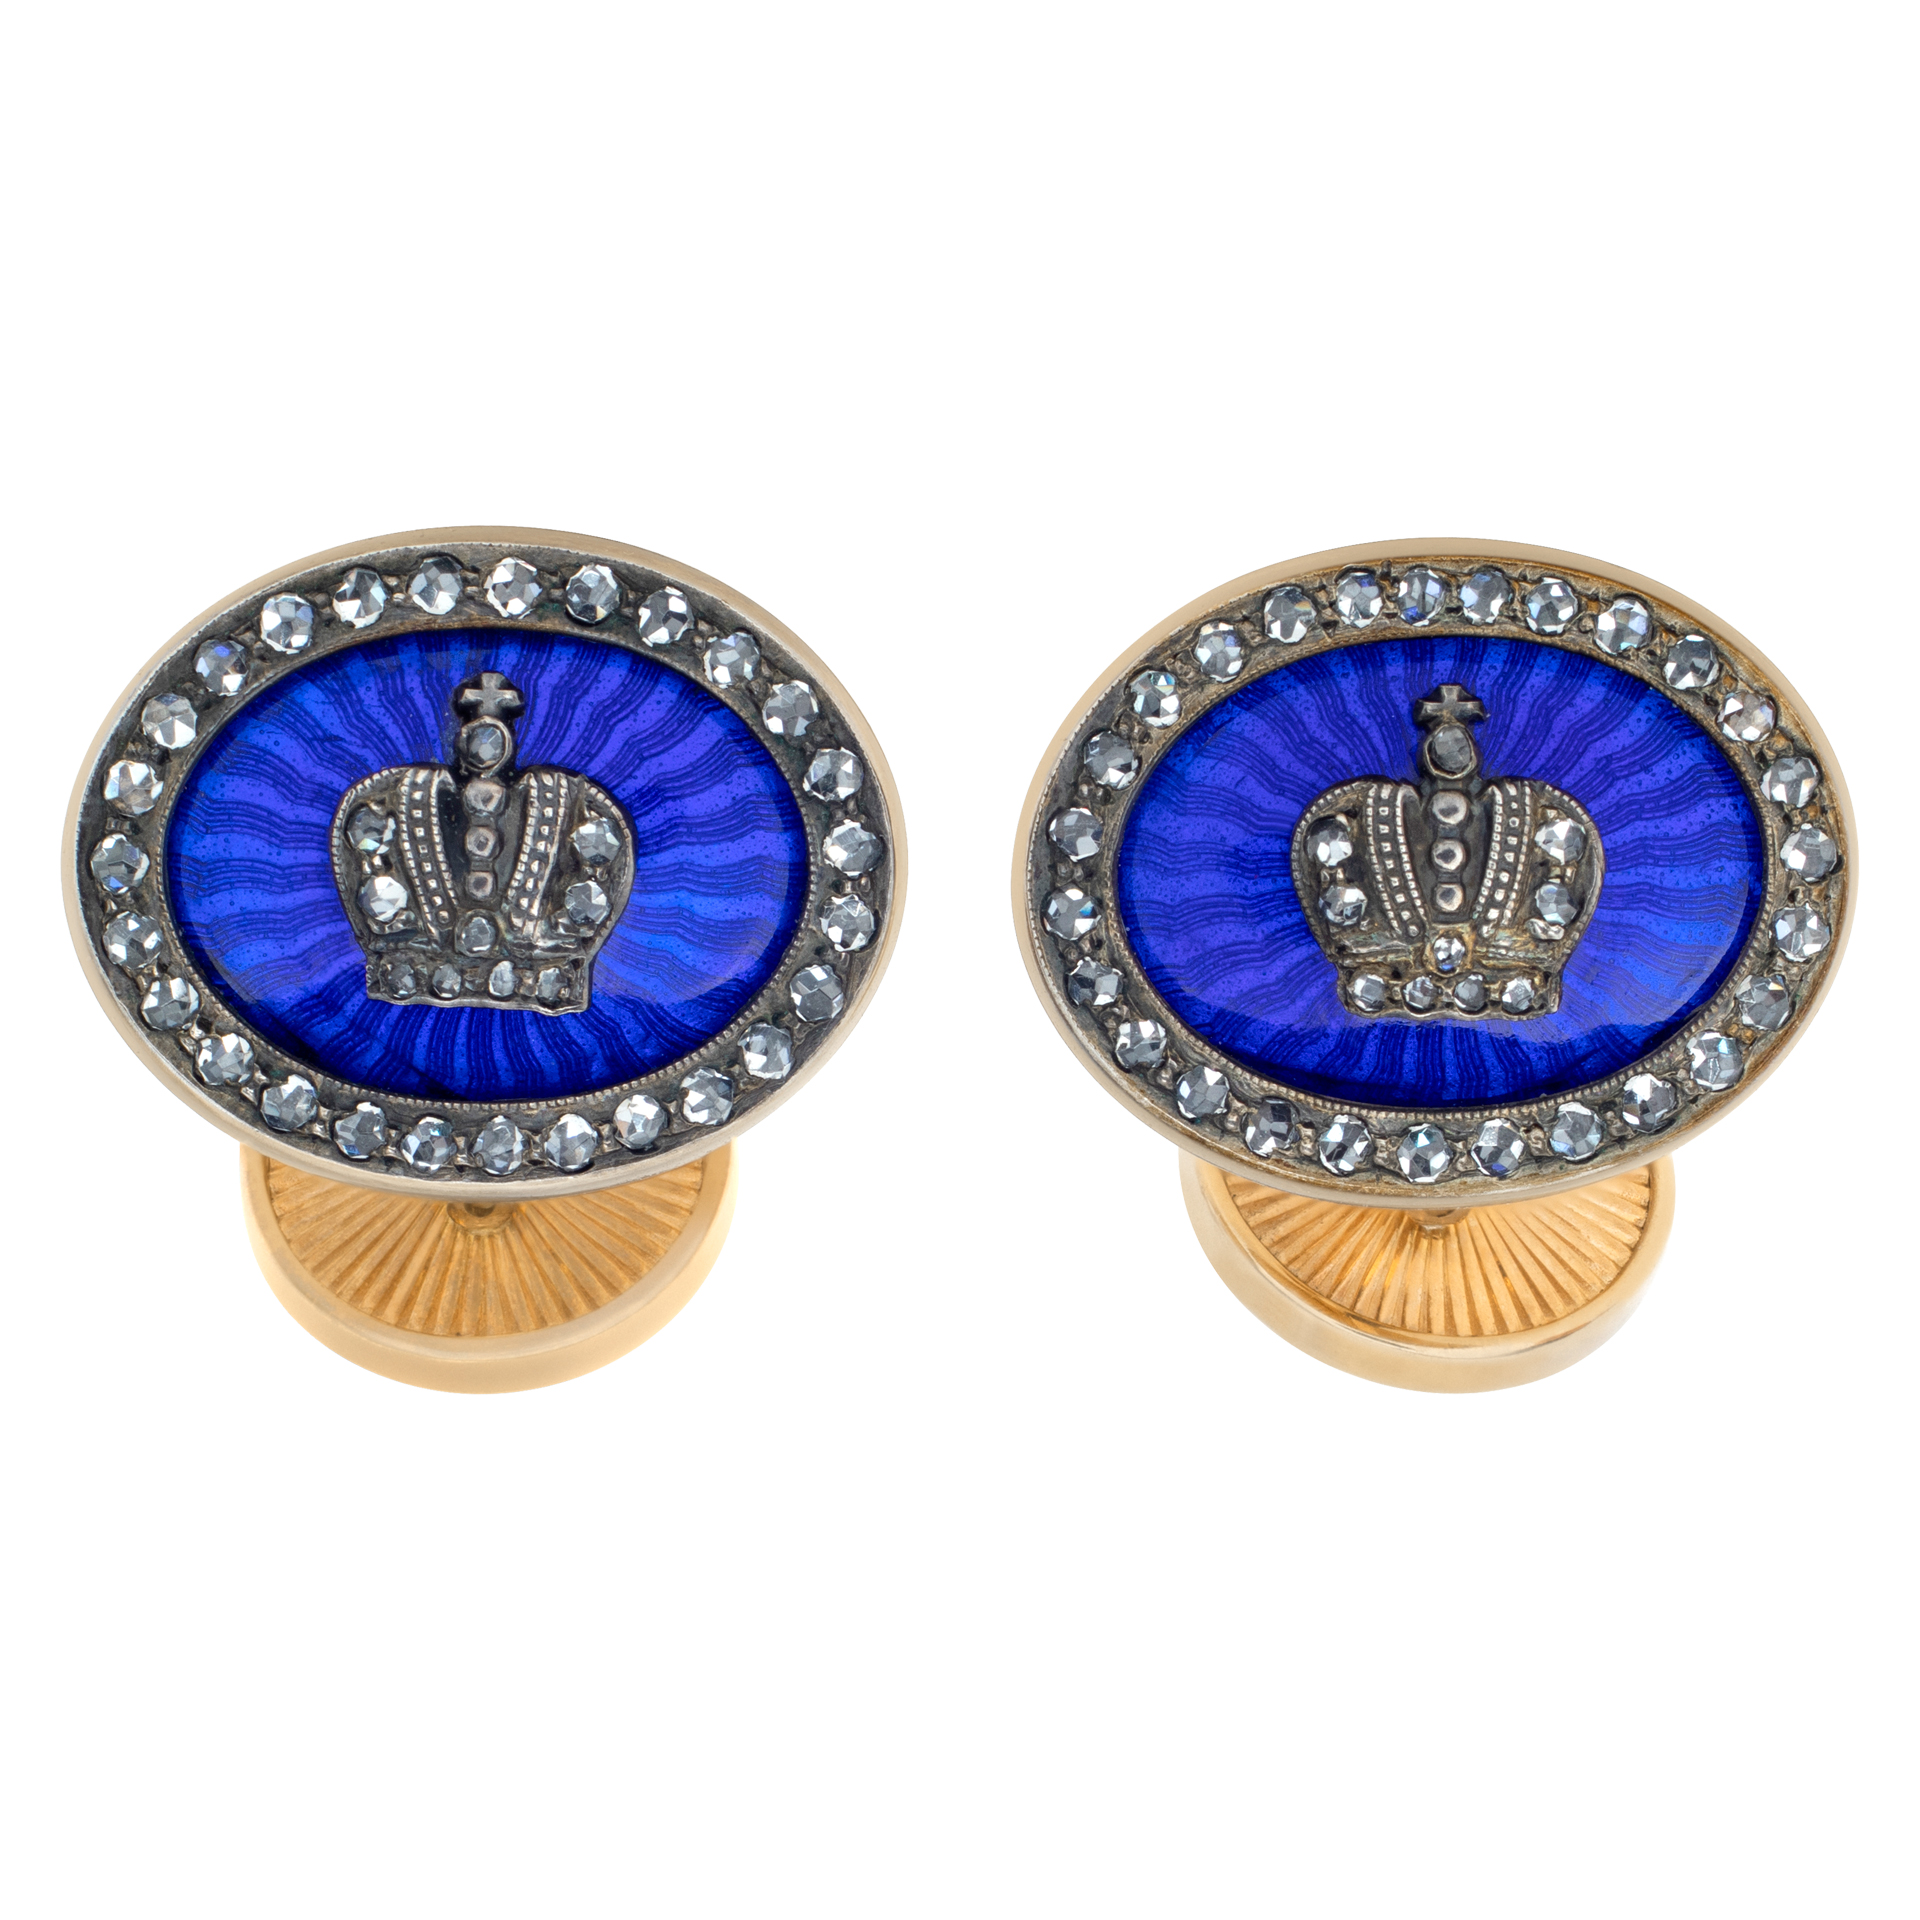 Cufflinks in 14k yellow gold, blue enamel and sterling silver with 0.20 cts of rose cut diamonds (Stones)